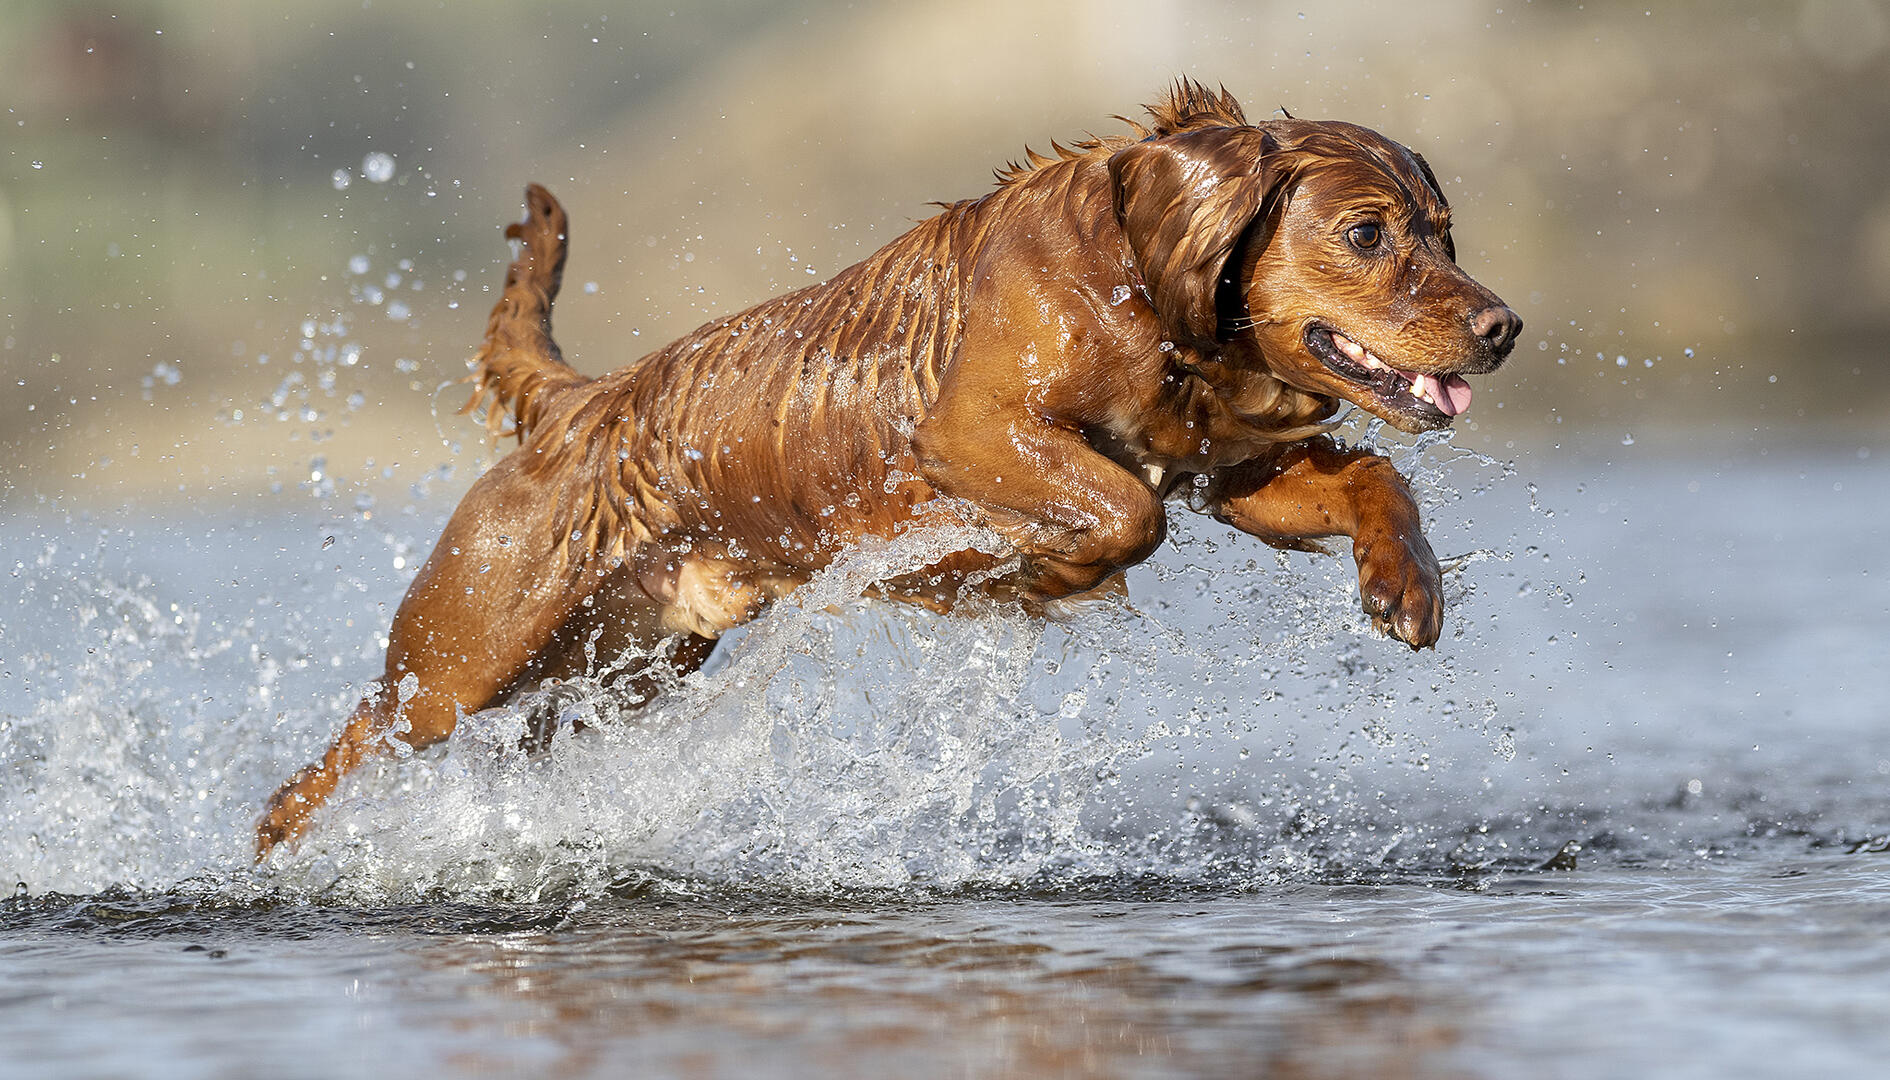 Crowd results | Dogs - Animals photo contest | Photocrowd photo ...